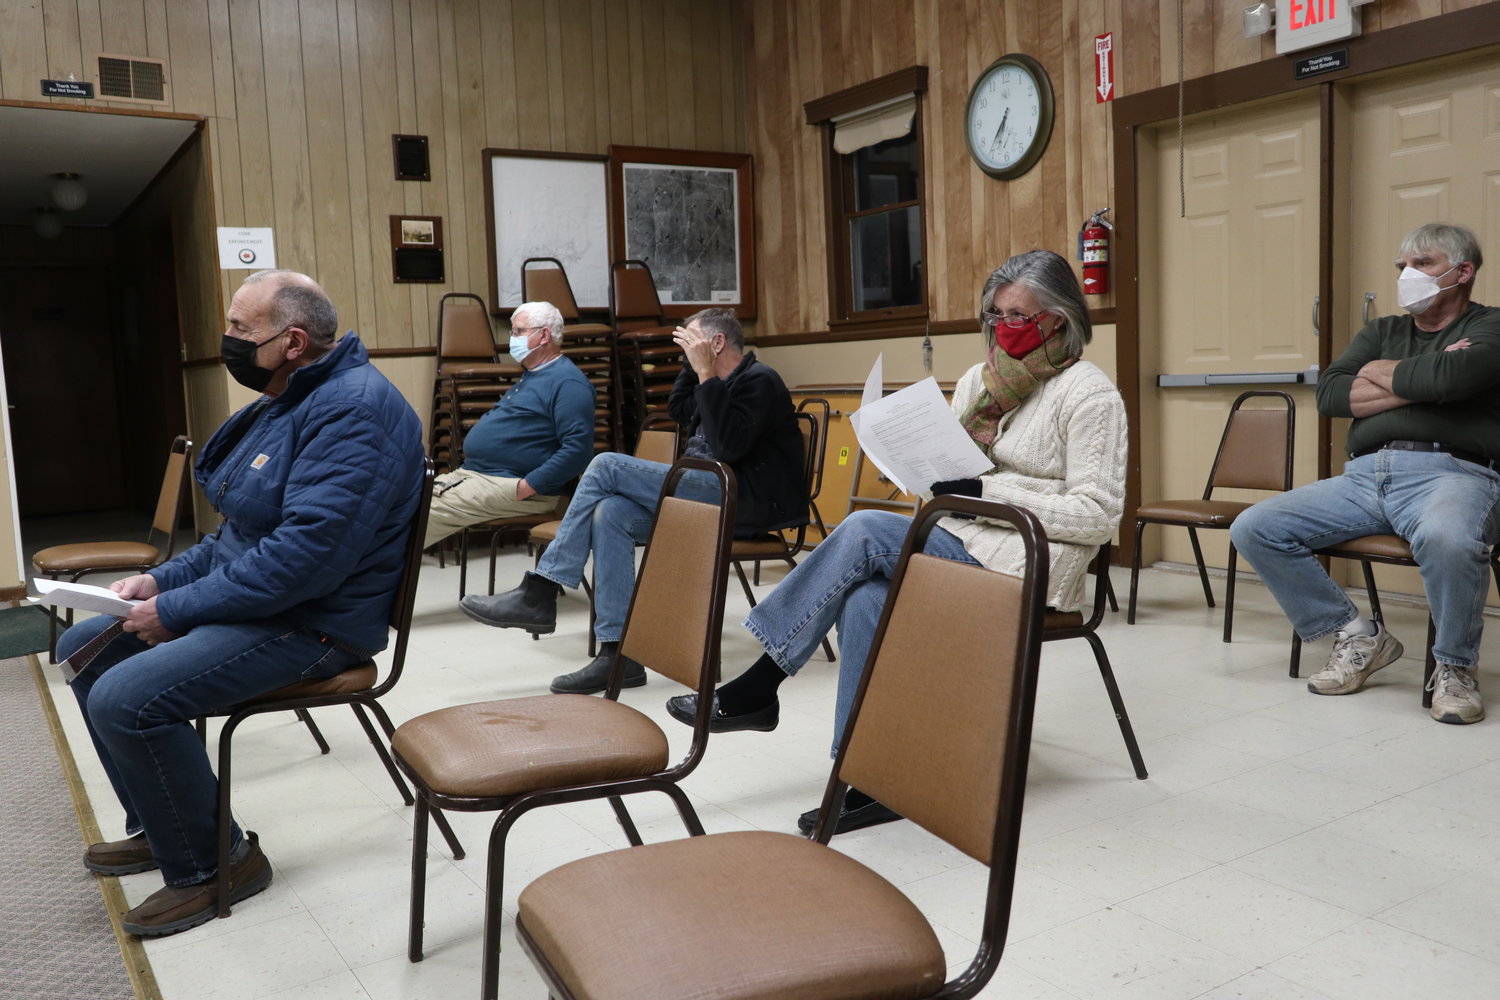 The audience for the public hearing on canabis dispensaries in Highland was sparsely attended.